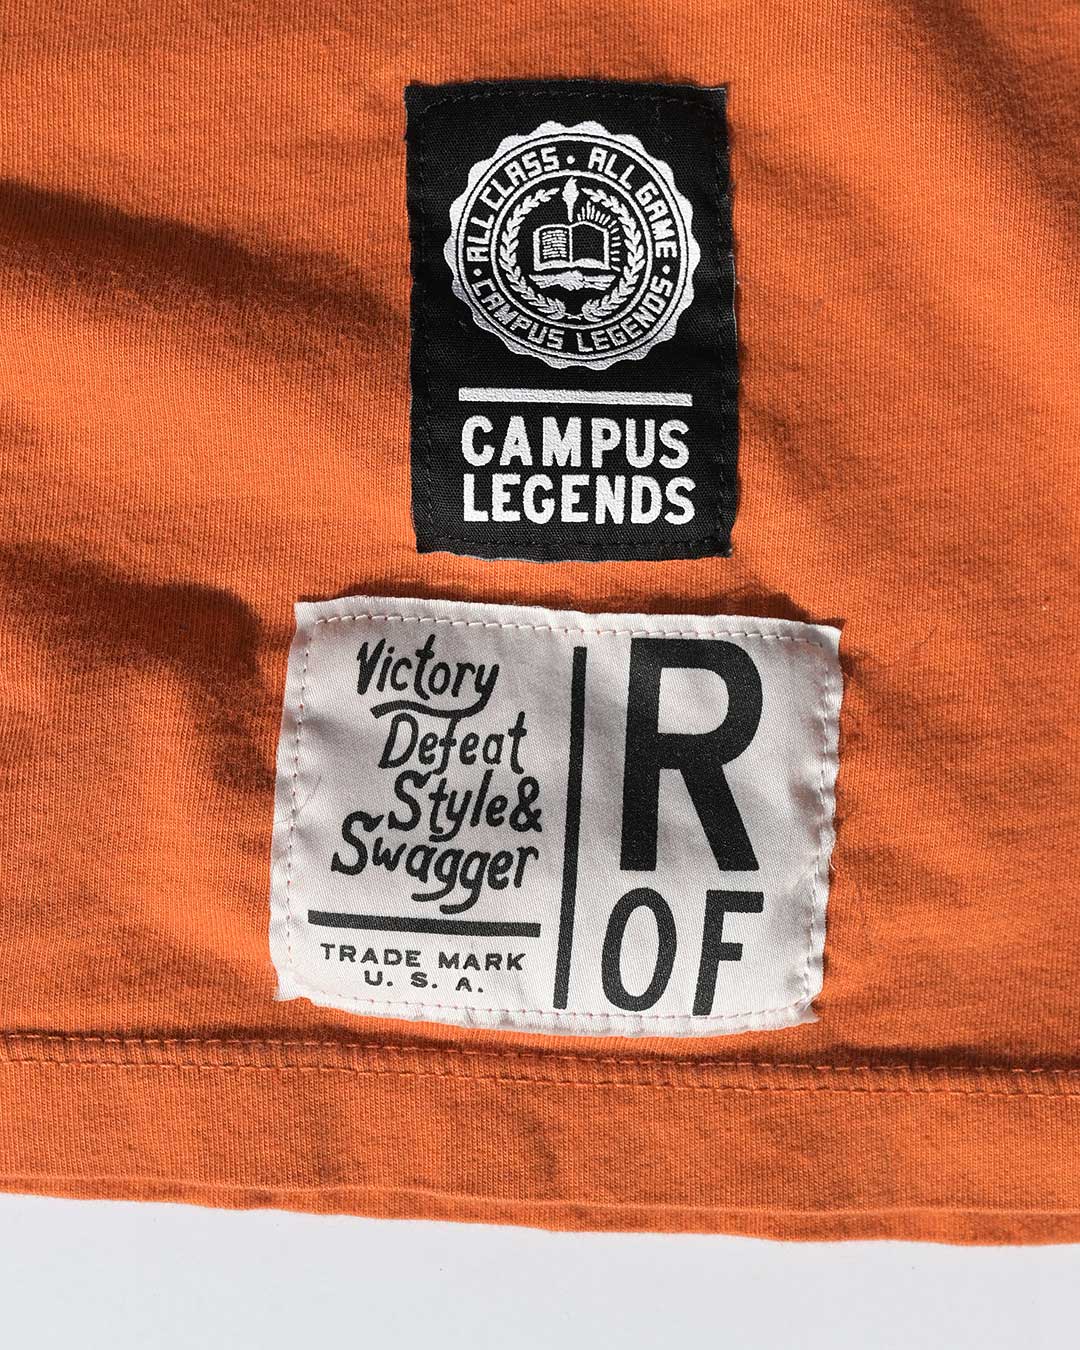 Melo Syracuse #15 Orange Tee - Roots of Fight